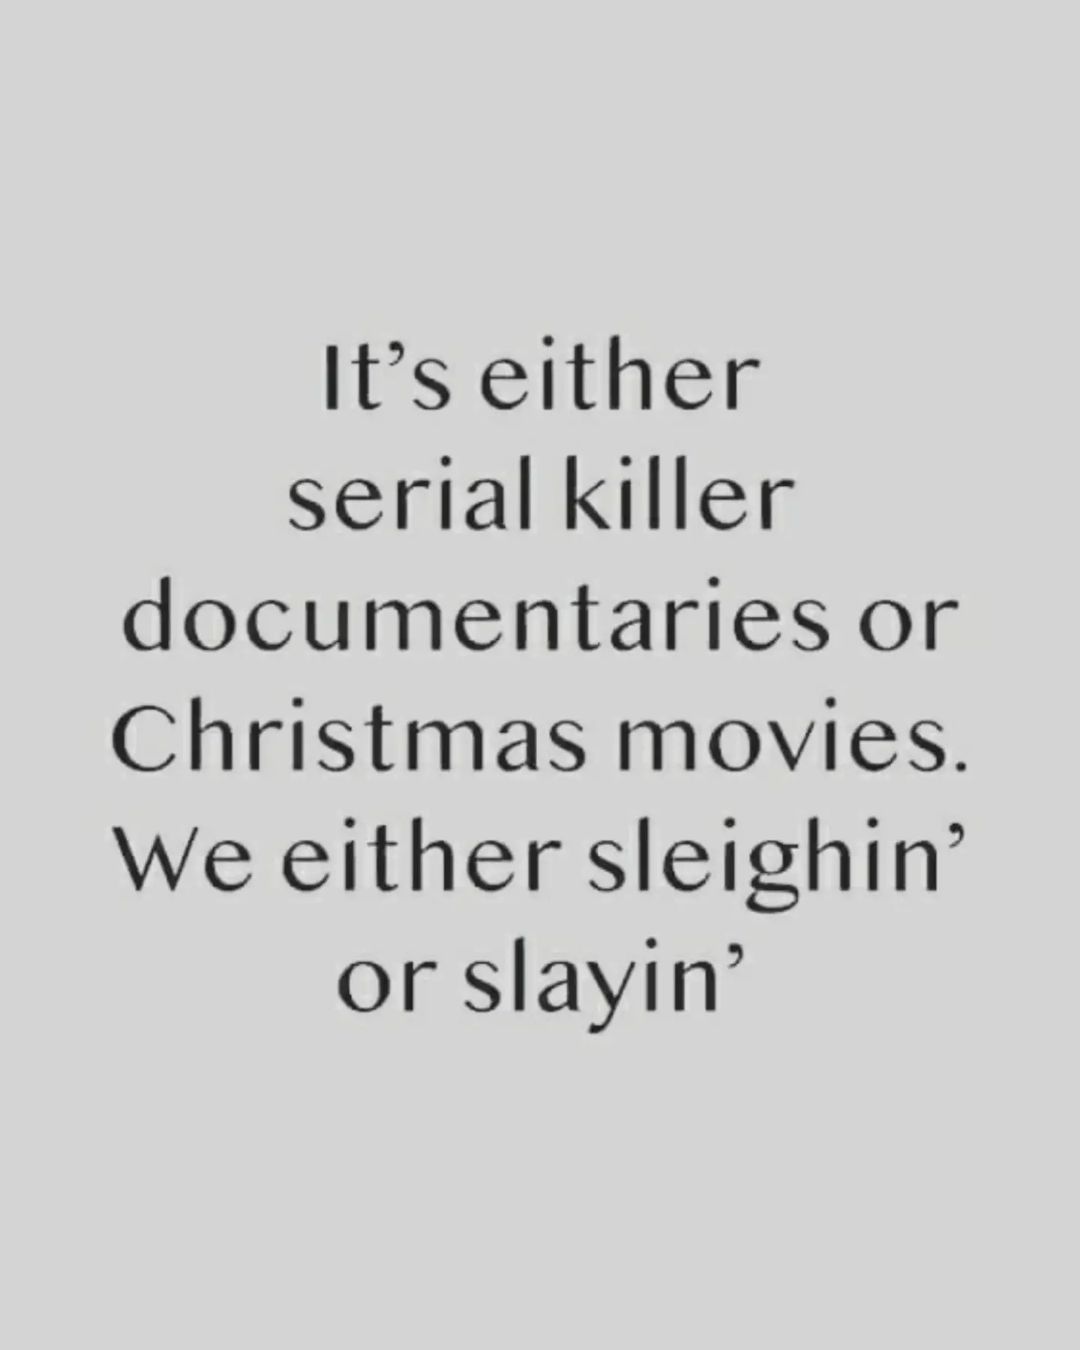 meme about watching Christmas movies or serial killer docs on Netflix